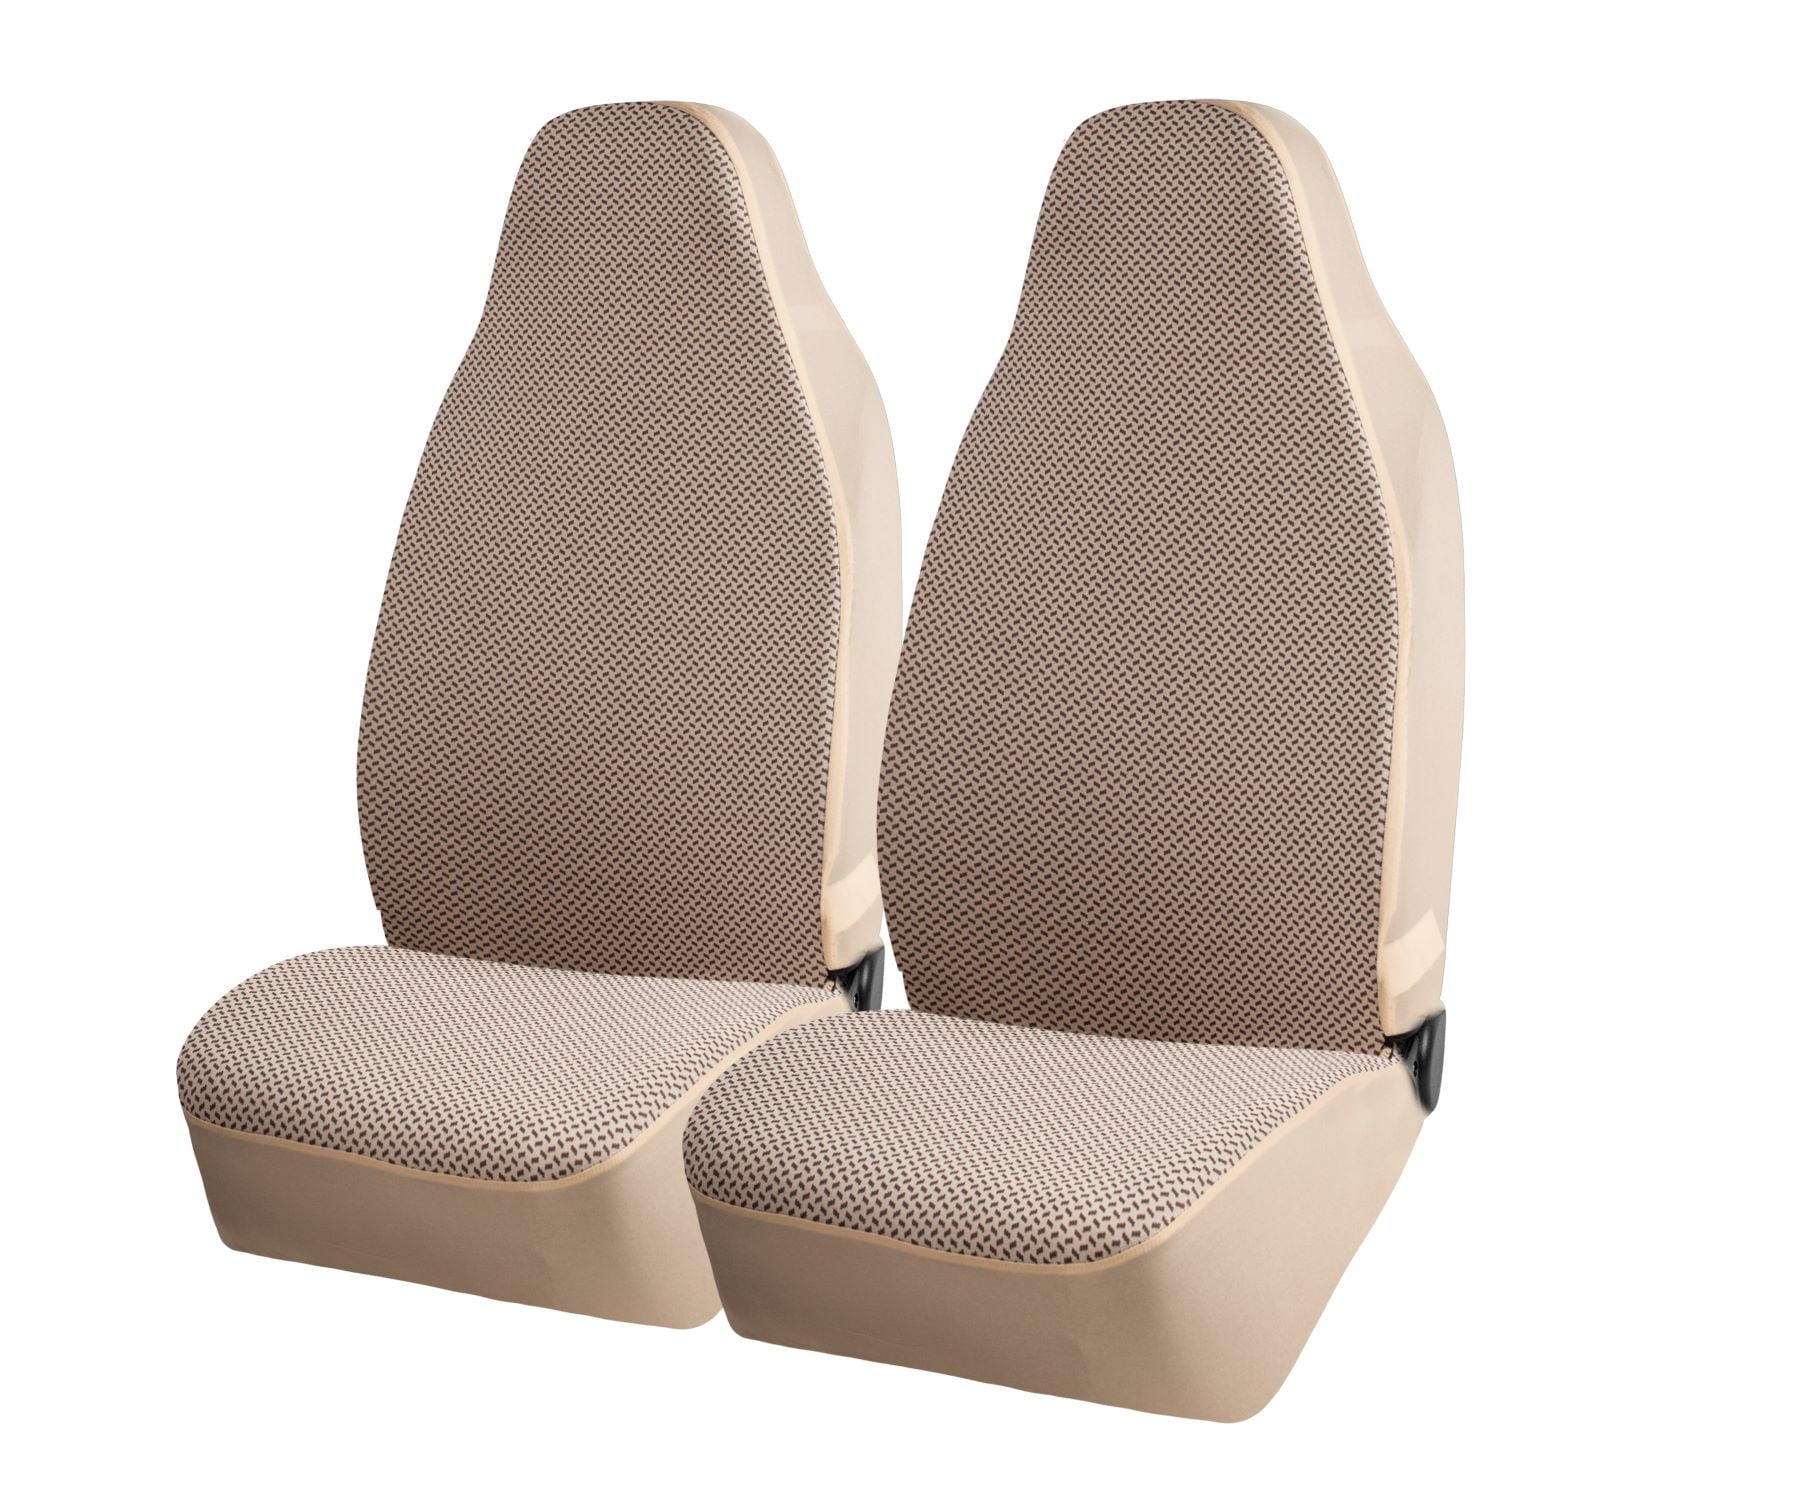 Auto Drive 2 Piece Starla High Back Seat Covers Jacquard Polyester Tan, Universal Fit, AD081703TAN